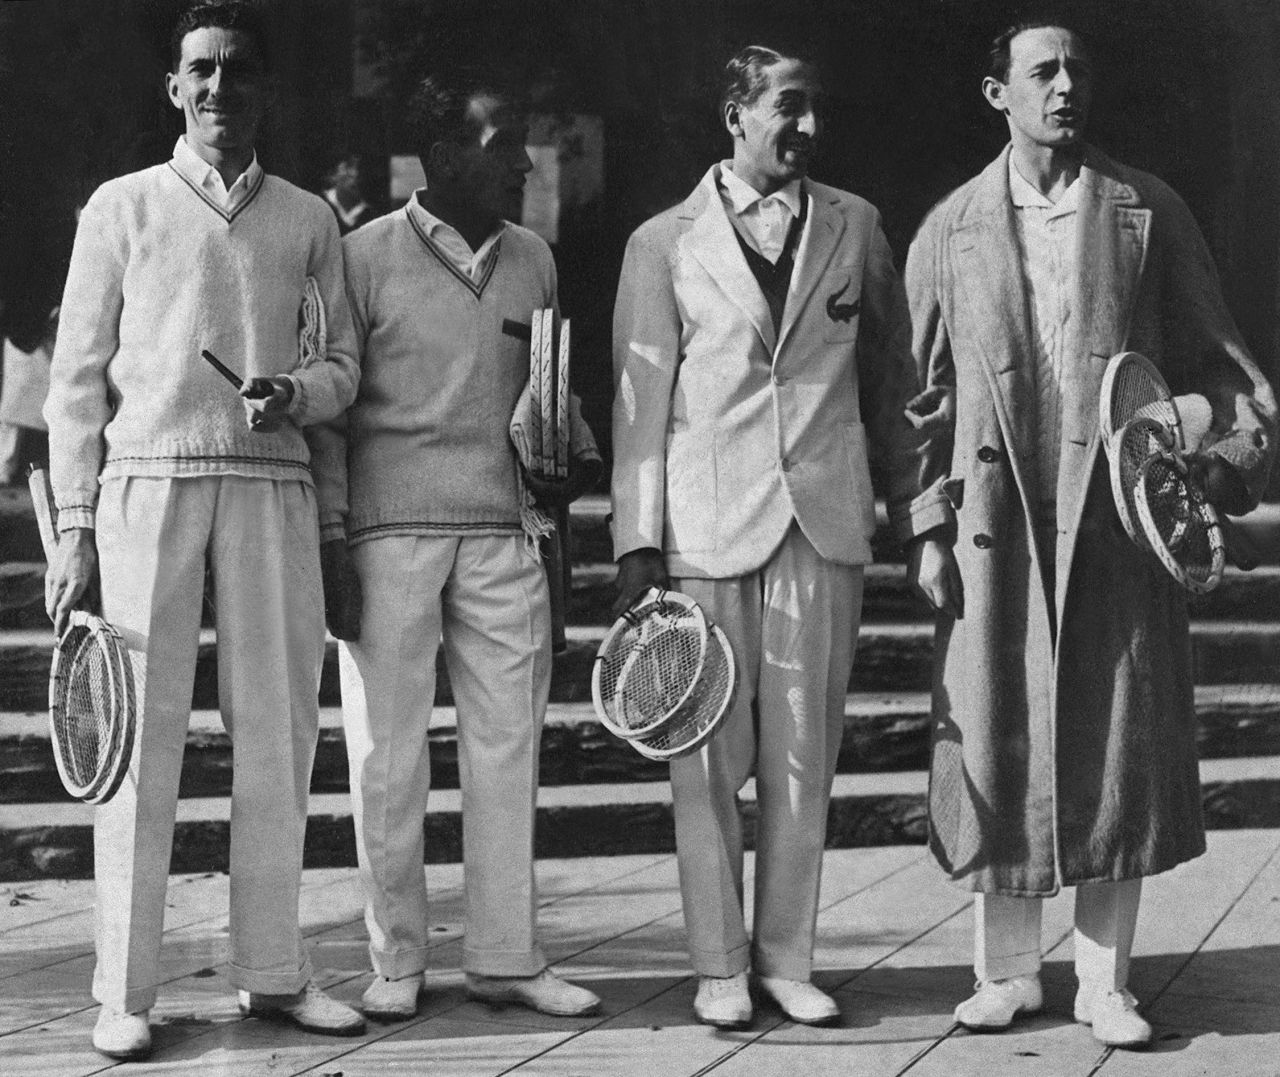 From left: Jacques Brugnon, Henri Cochet, Rene Lacoste and Jean Borotra won the Davis Cup six times between 1927 and 1932.